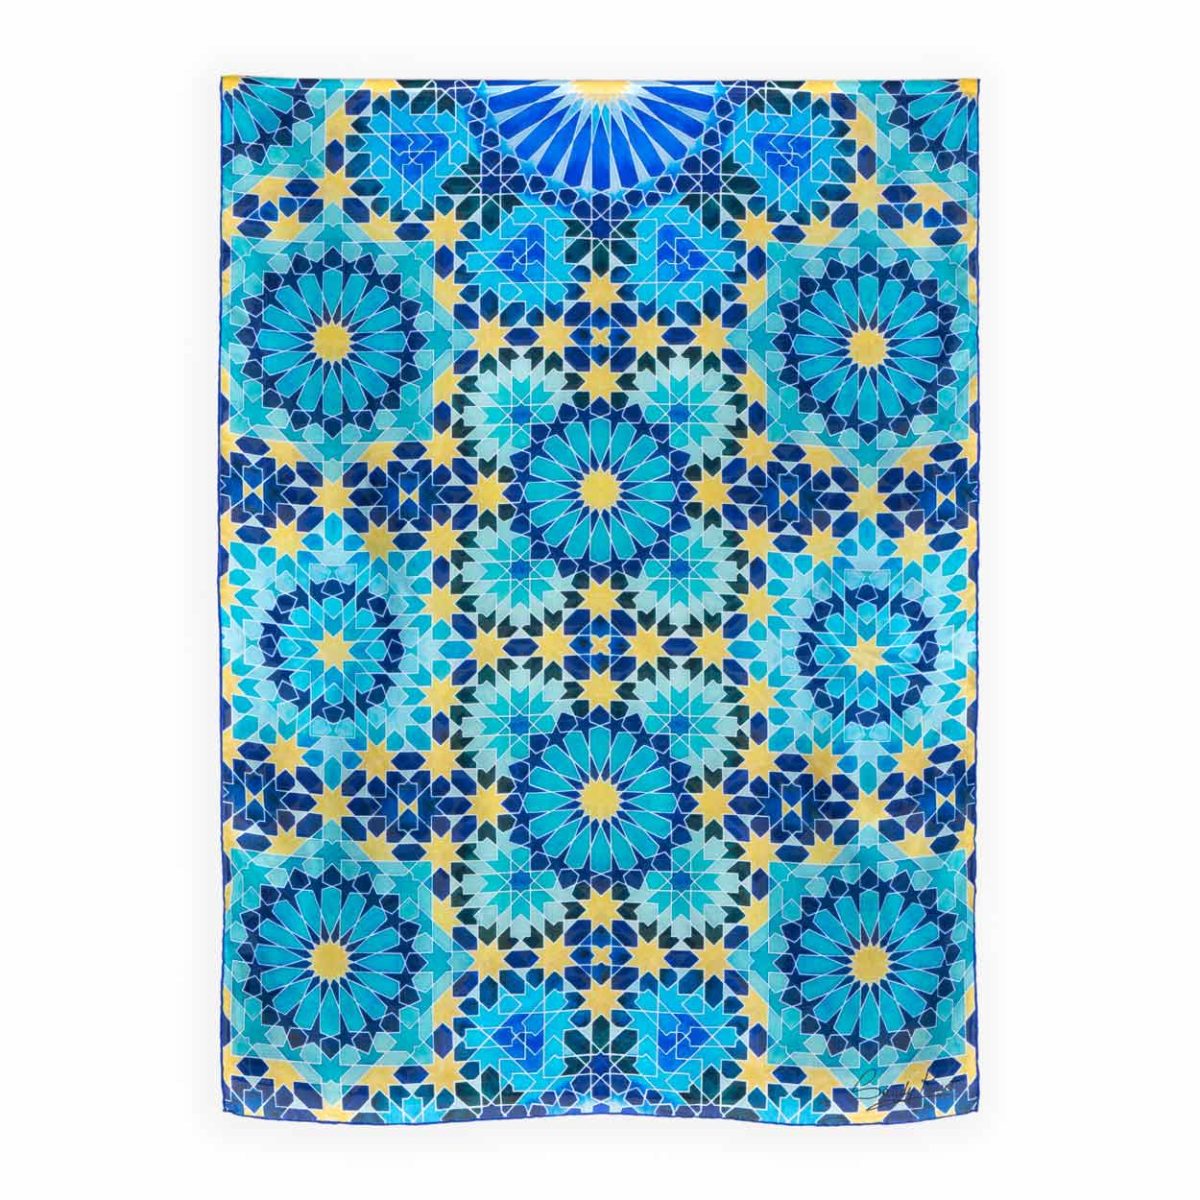 Large blue silk scarf with geometric print inspired by Islamic Art